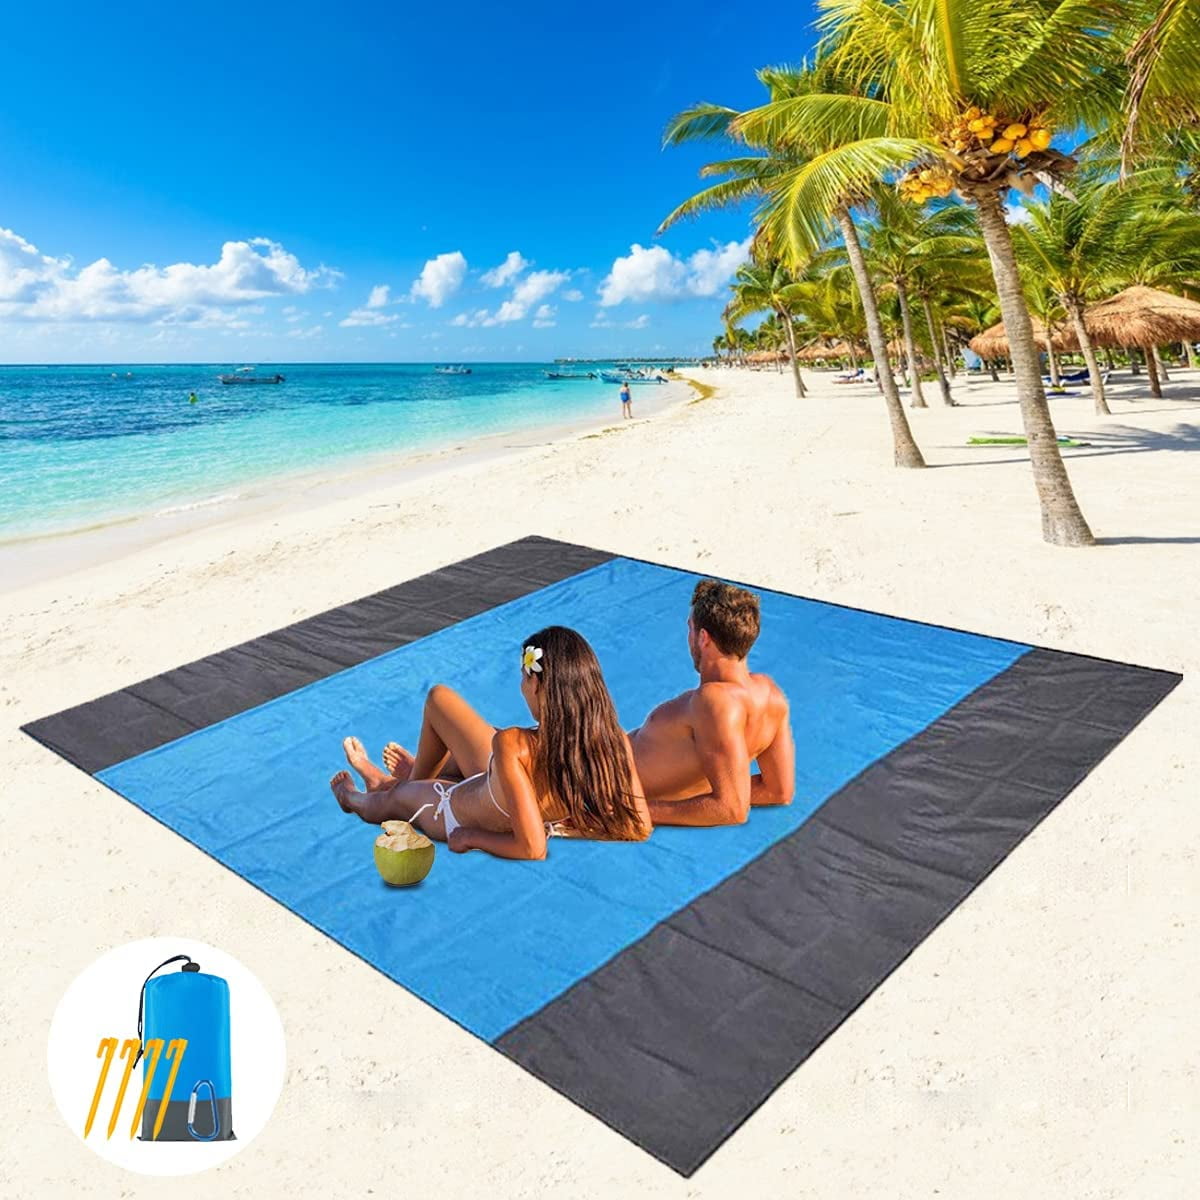 Waterproof & Sand Free Quick Drying Nylon Outdoor Beach Picnic Mat with with Compact Storage Bag Whatyiu Beach Blanket 78.7x82.7 Outdoor Picnic Blanket 